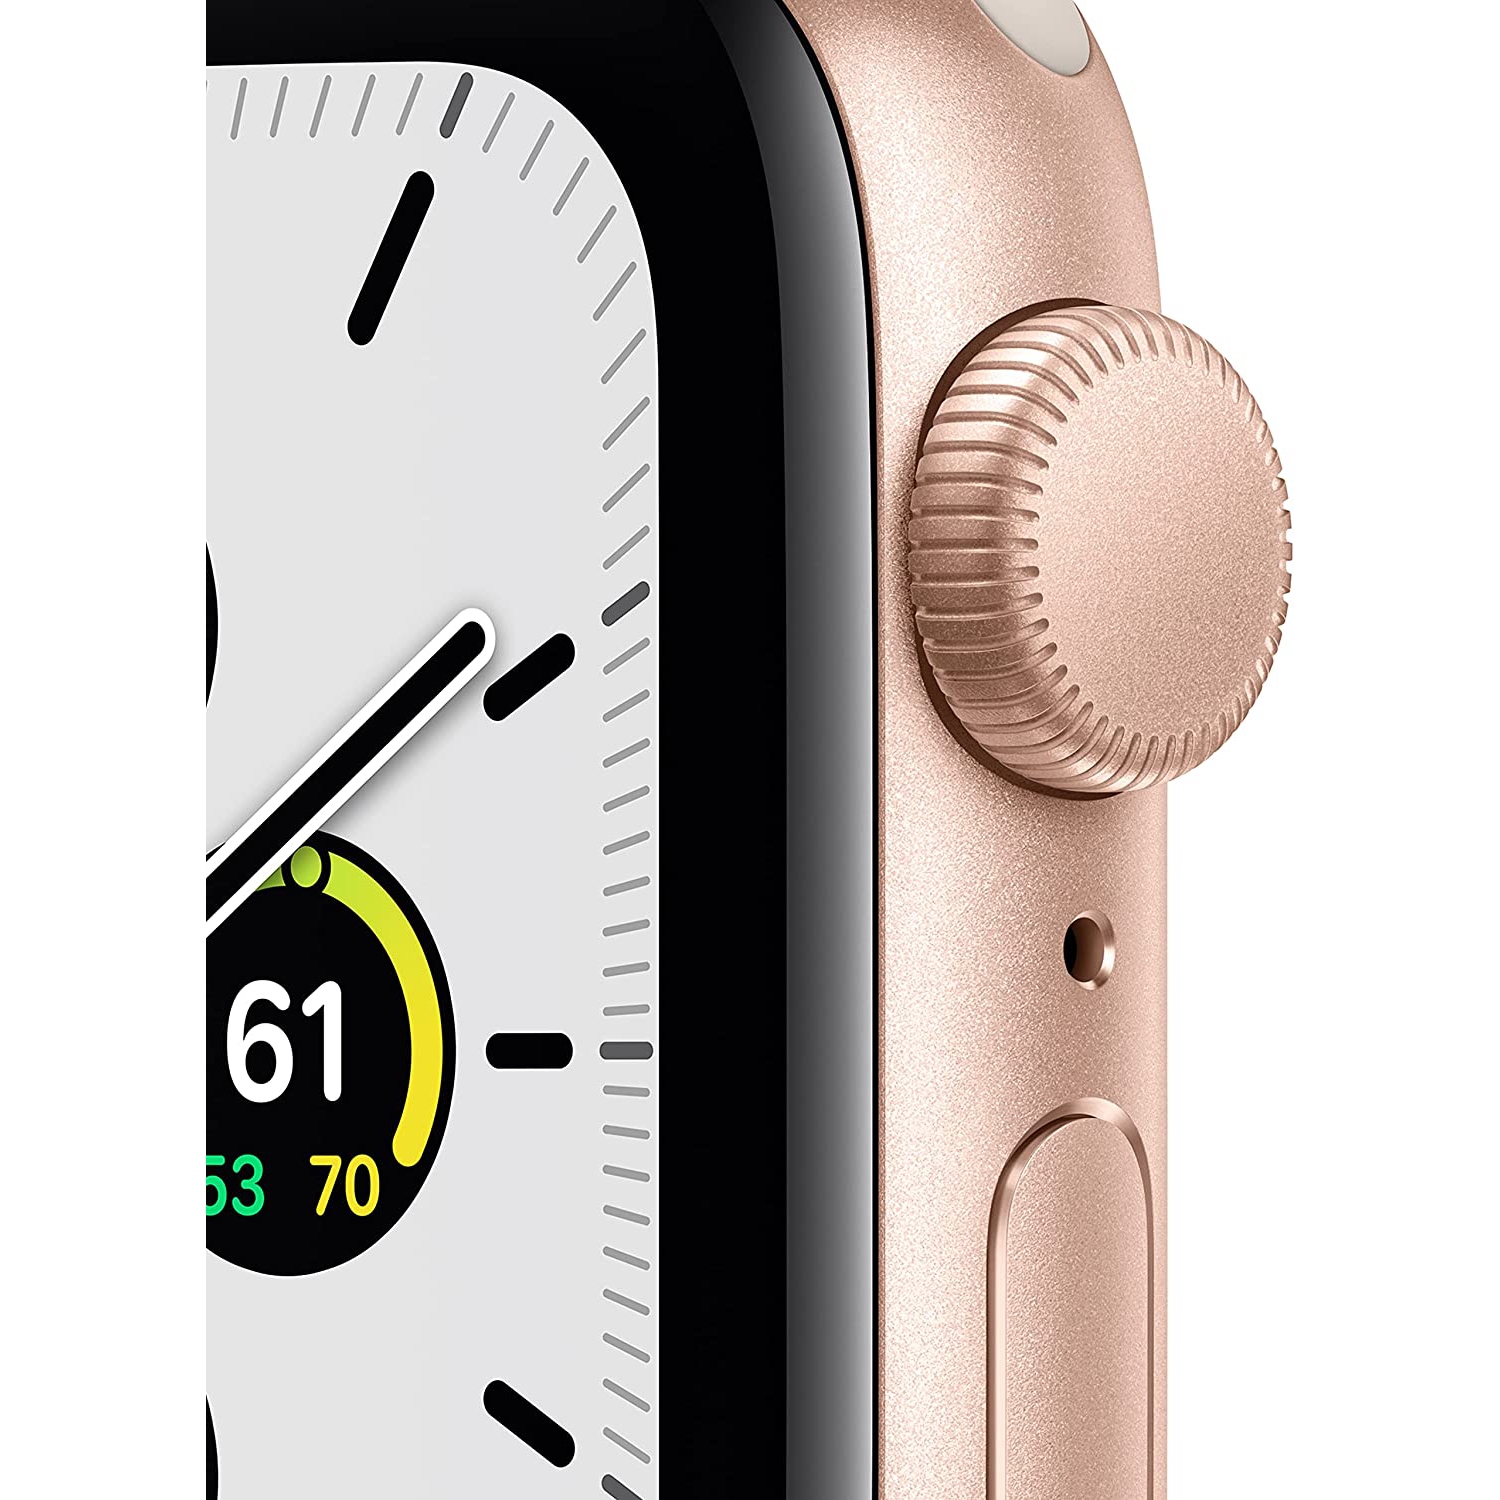 Apple Watch SE (GPS, 40mm) - Gold Aluminum Case with Starlight